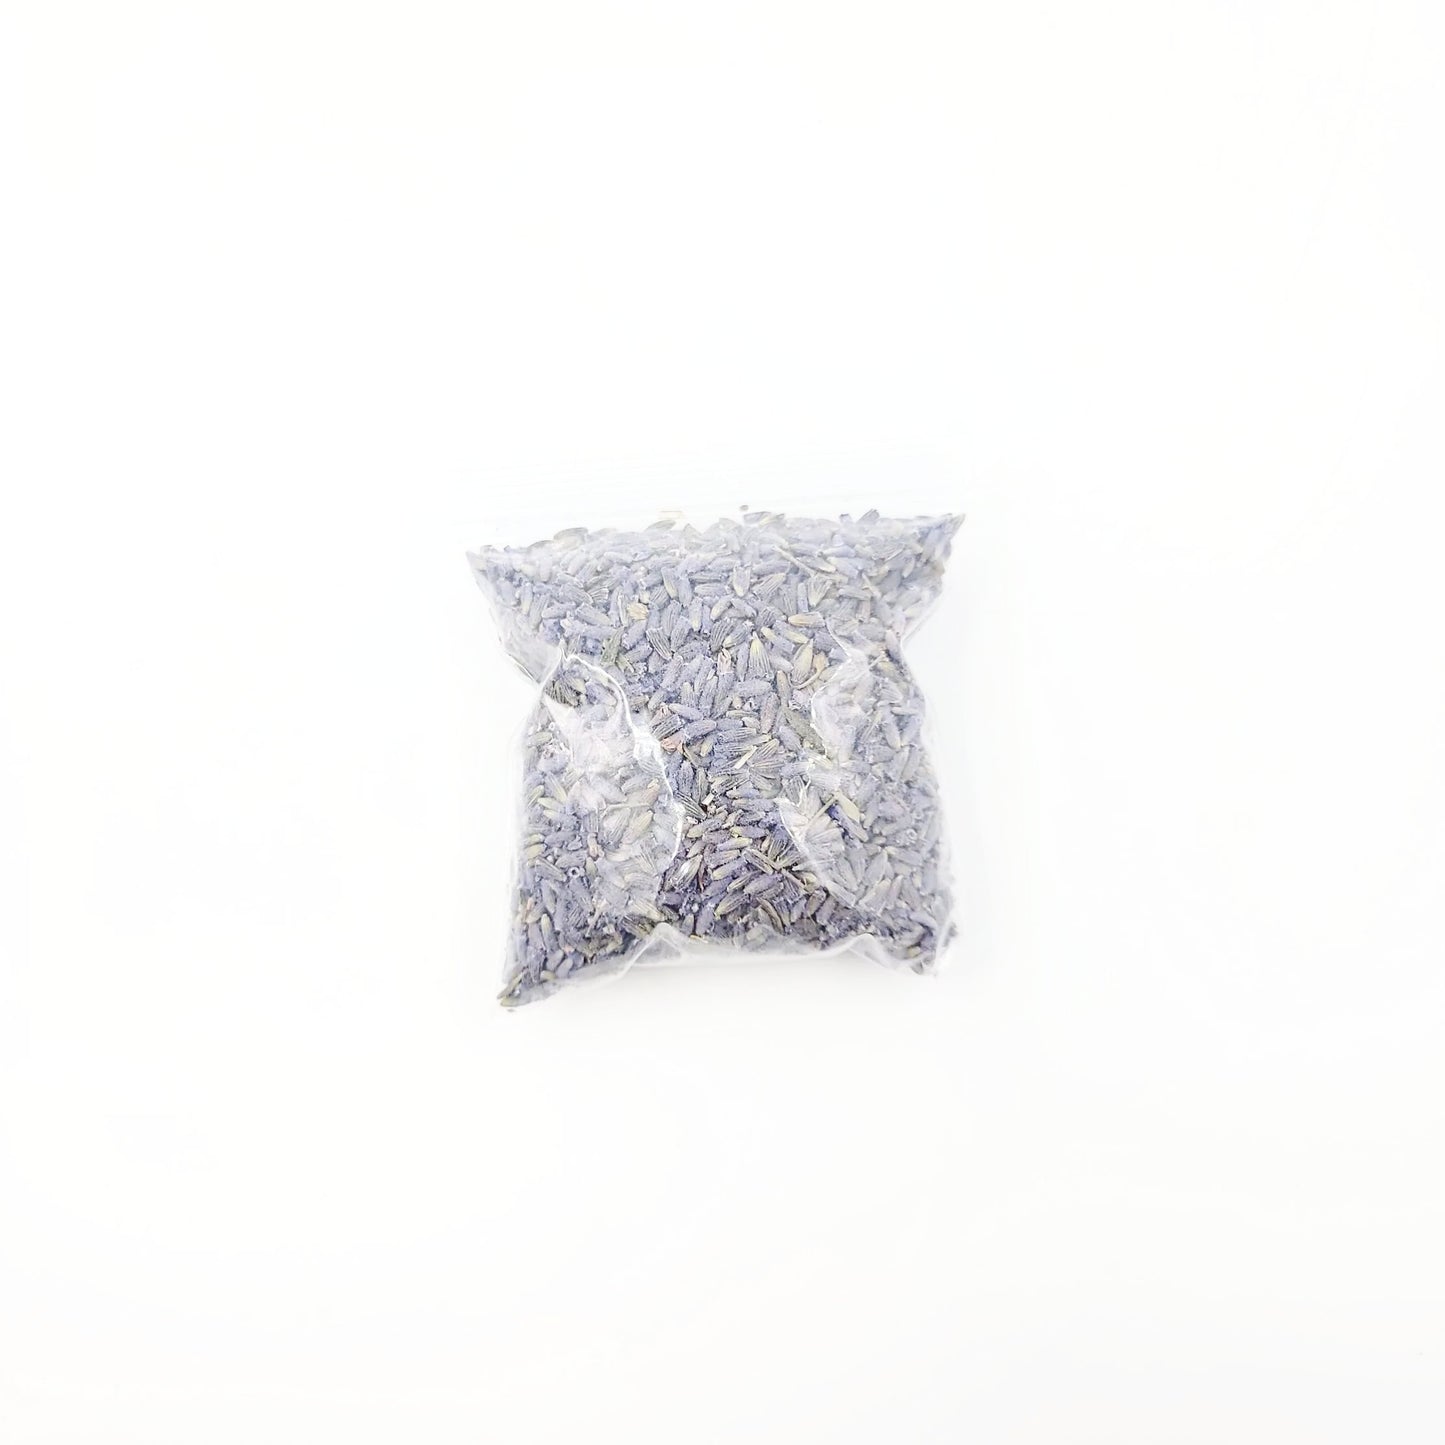 Lavender Flower Dried - Elevated Metaphysical